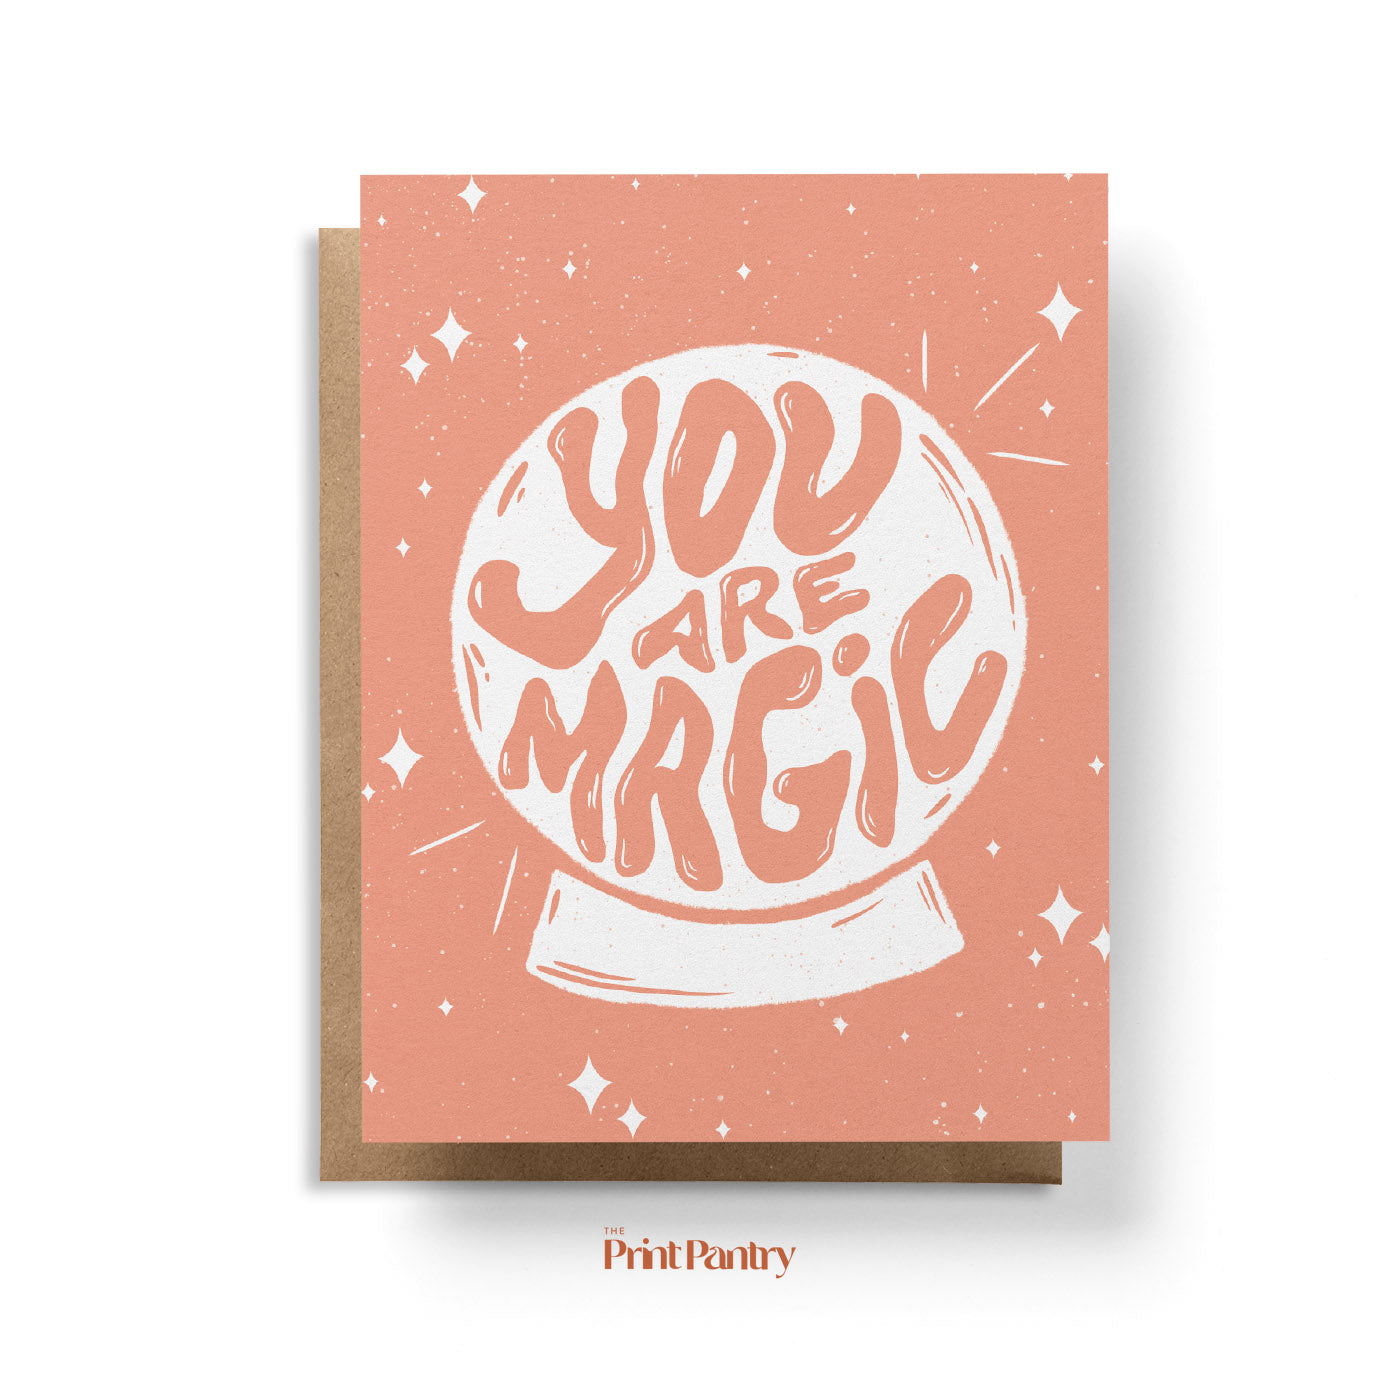 You Are Magic Greeting Card laying on a Kraft paper envelope